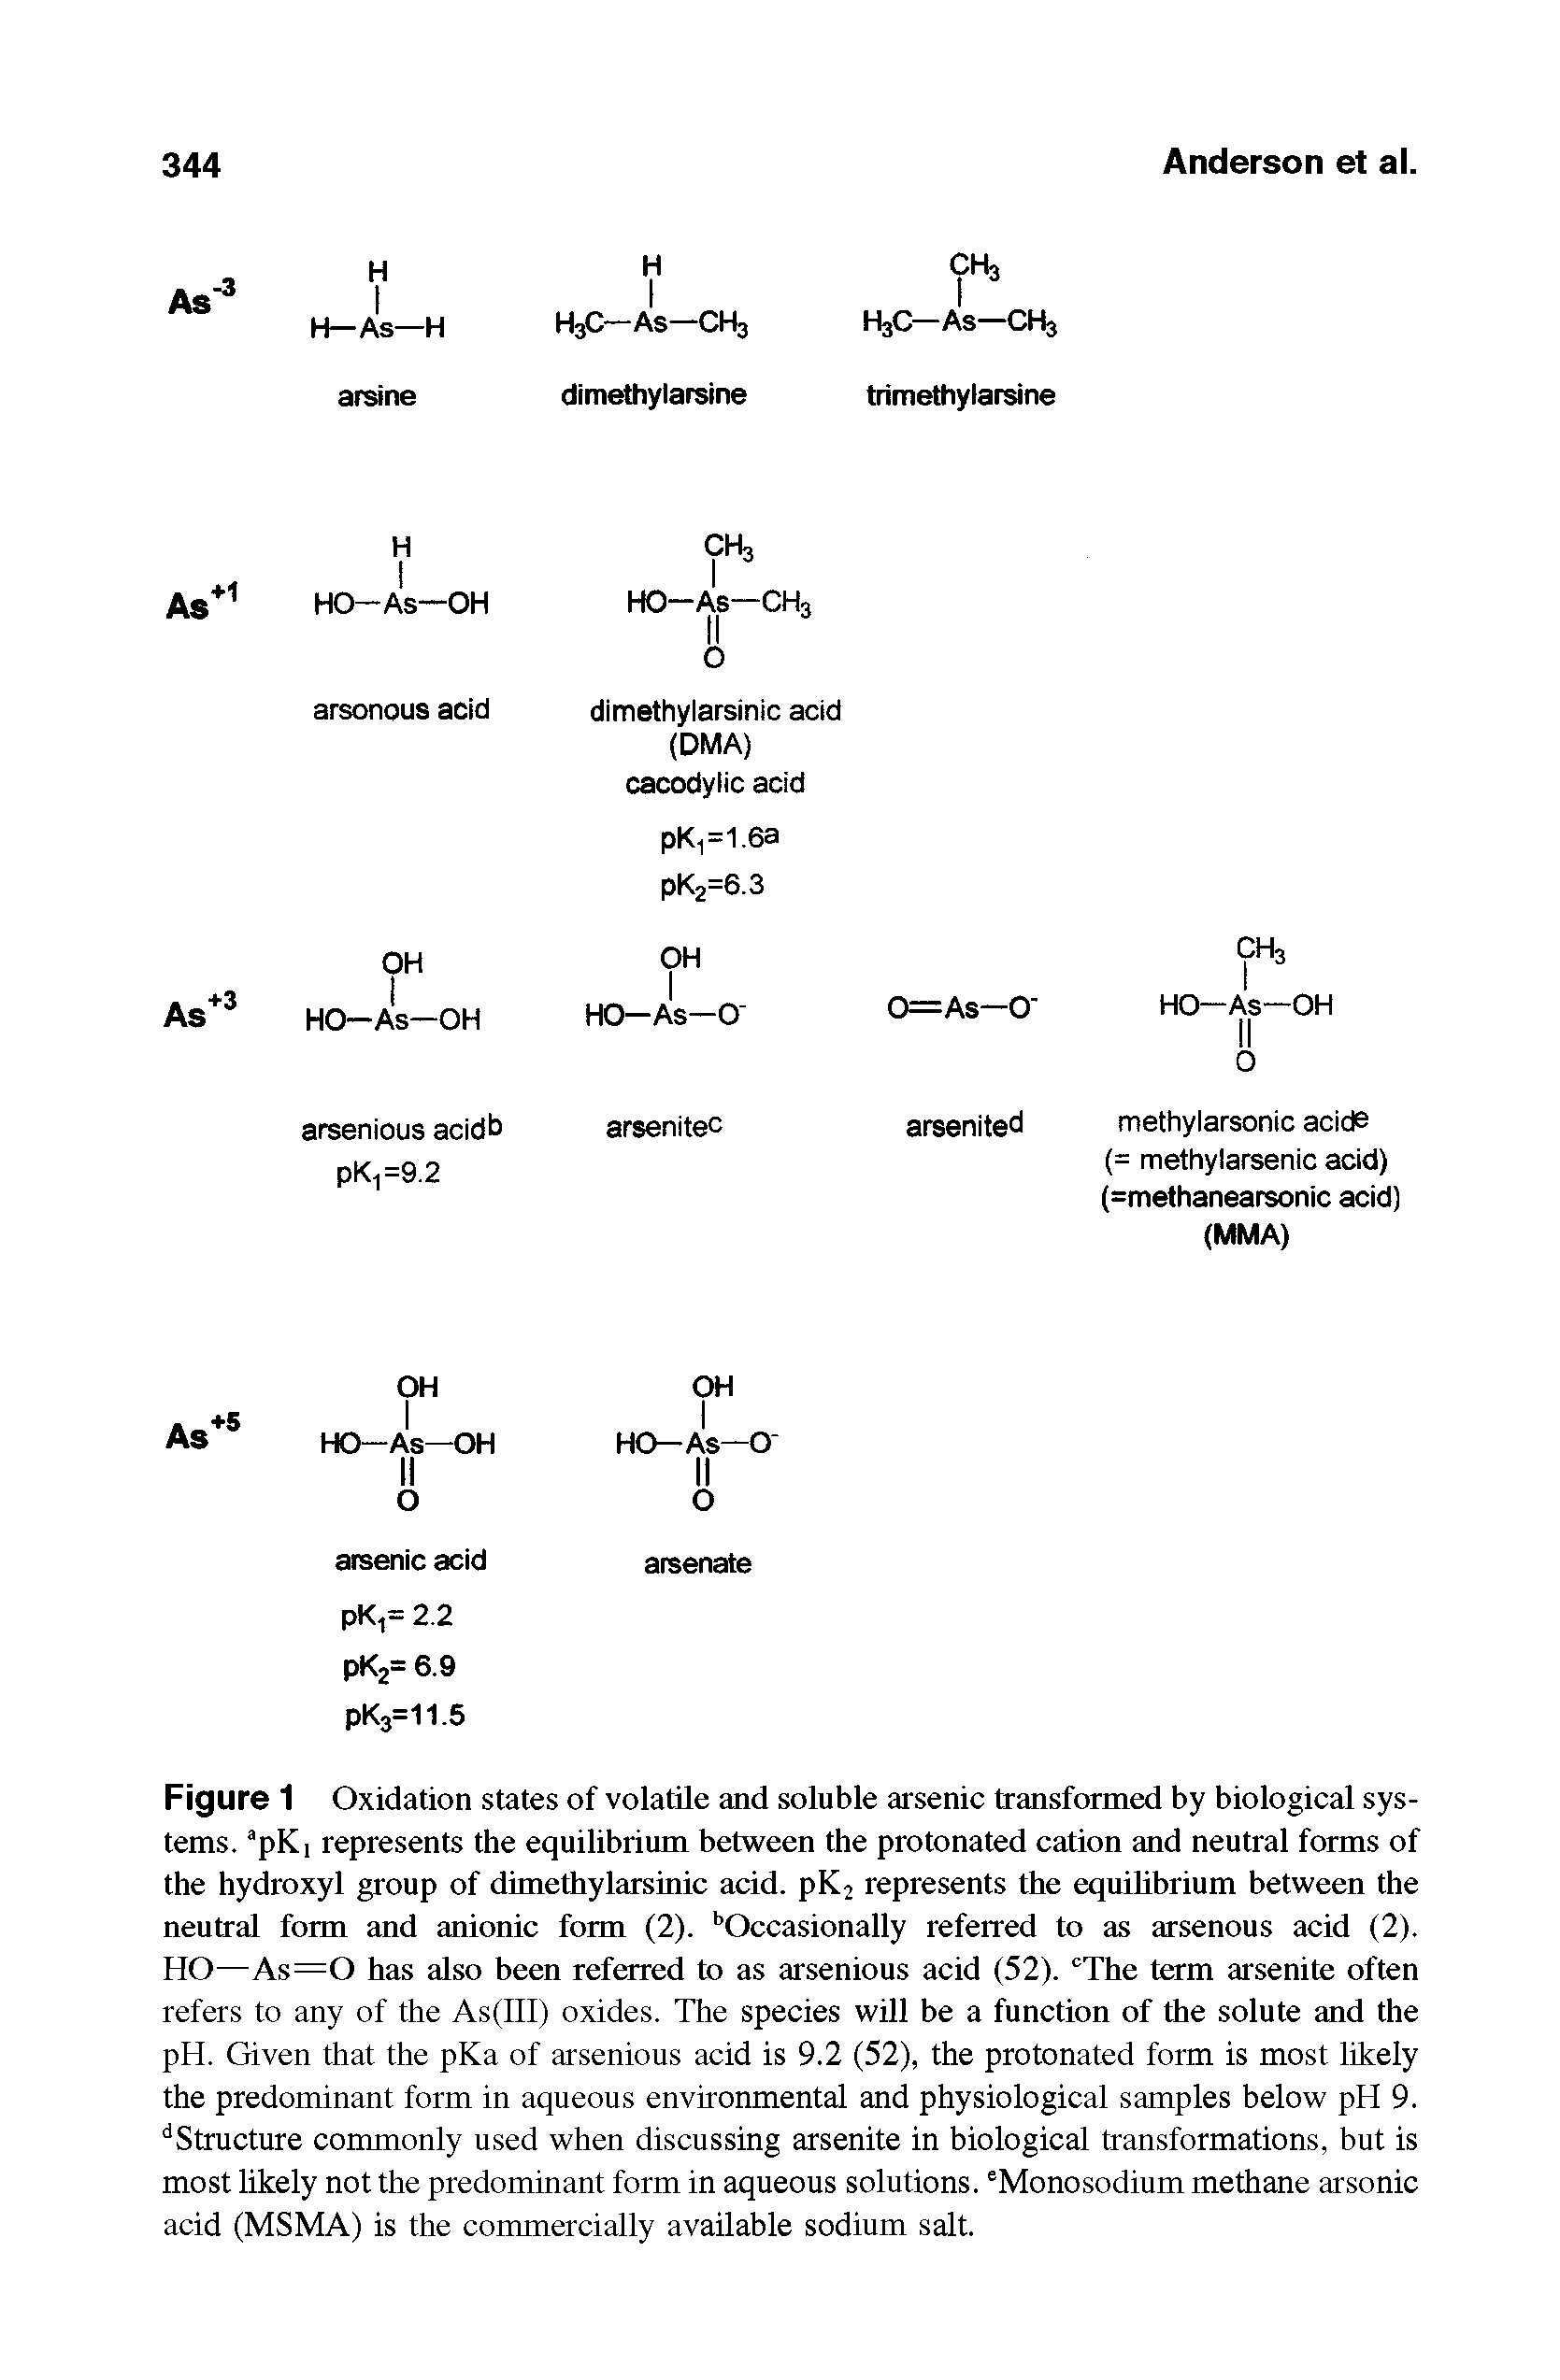 Figure 1 Oxidation states of volatile and soluble arsenic transformed by biological systems. pKi represents the equilibrium between the protonated cation and neutral forms of the hydroxyl group of dimethylarsinic acid. pKj represents the equilibrium between the neutral form and anionic form (2). Occasionally referred to as arsenous acid (2). HO—As=0 has also been referred to as arsenious acid (52). The term arsenite often refers to any of the As(lll) oxides. The species will be a function of the solute and the pH. Given that the pKa of arsenious acid is 9.2 (52), the protonated form is most likely the predominant form in aqueous environmental and physiological samples below pH 9. Structure commonly used when discussing arsenite in biological transformations, but is most likely not the predominant form in aqueous solutions. Monosodium methane arsonic acid (MSMA) is the commercially available sodium salt.